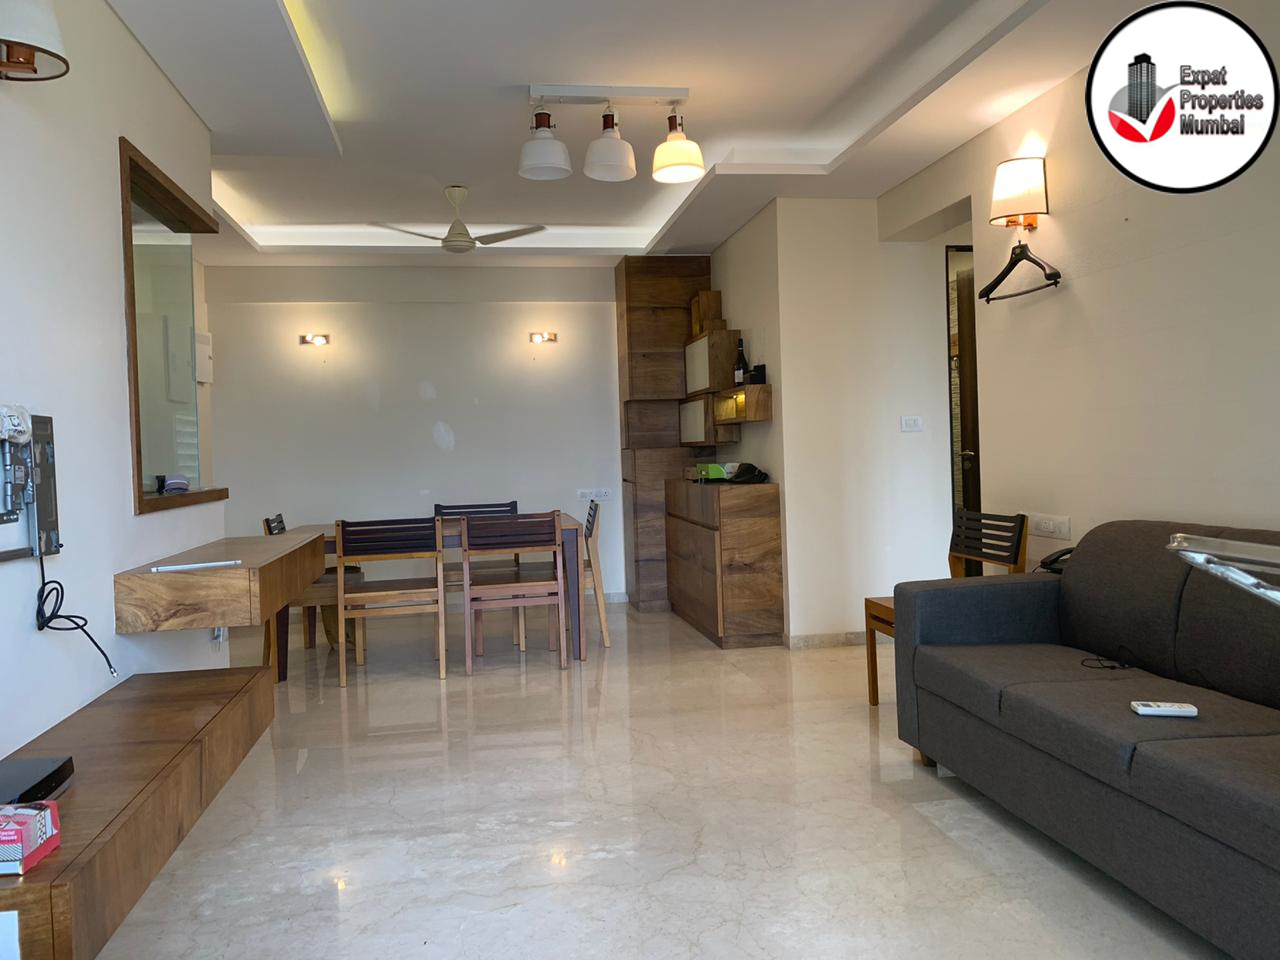 3BHK Fully Furnished Apartment for Rent in Andheri West | EXPAT ...